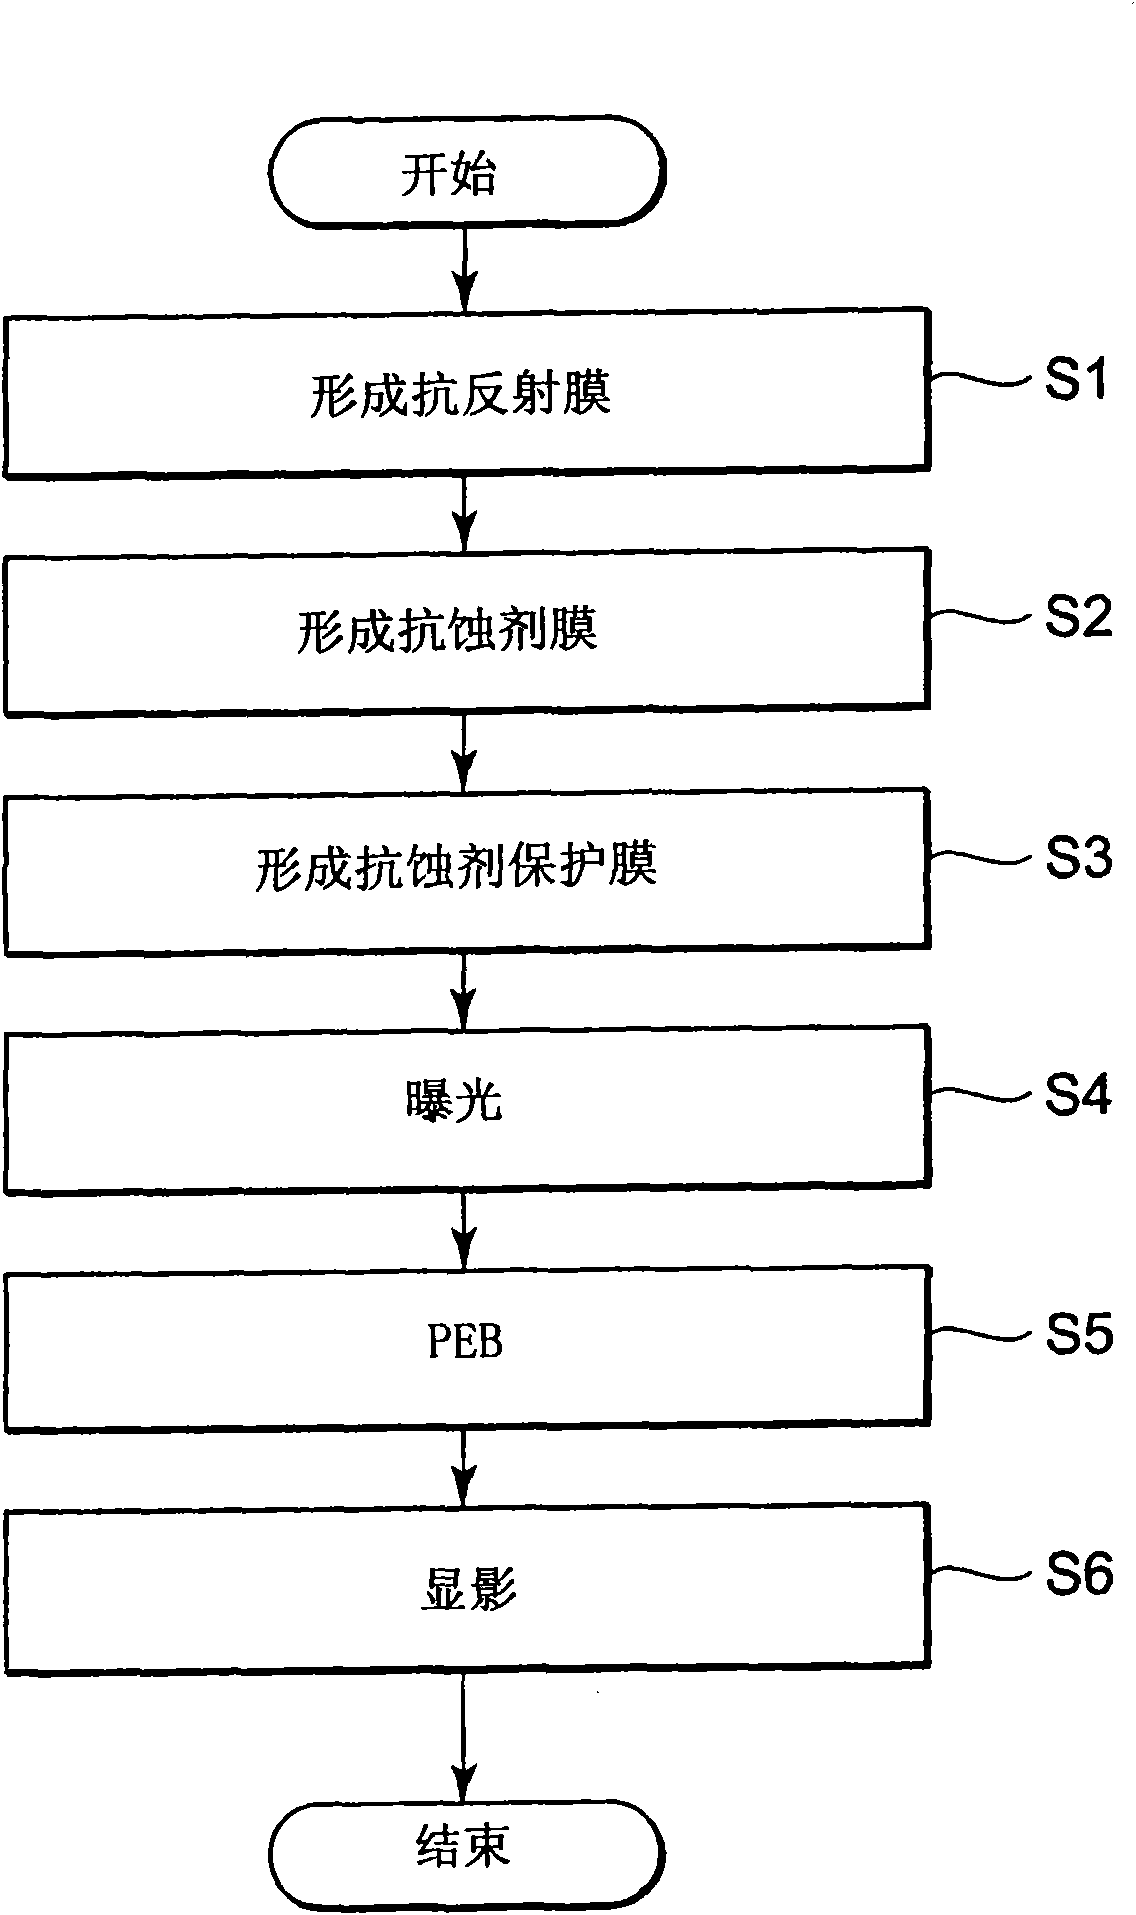 Manufacturing apparatus for semiconductor device, controlling method for manufacturing apparatus, and storage medium storing control program for manufacturing apparatus